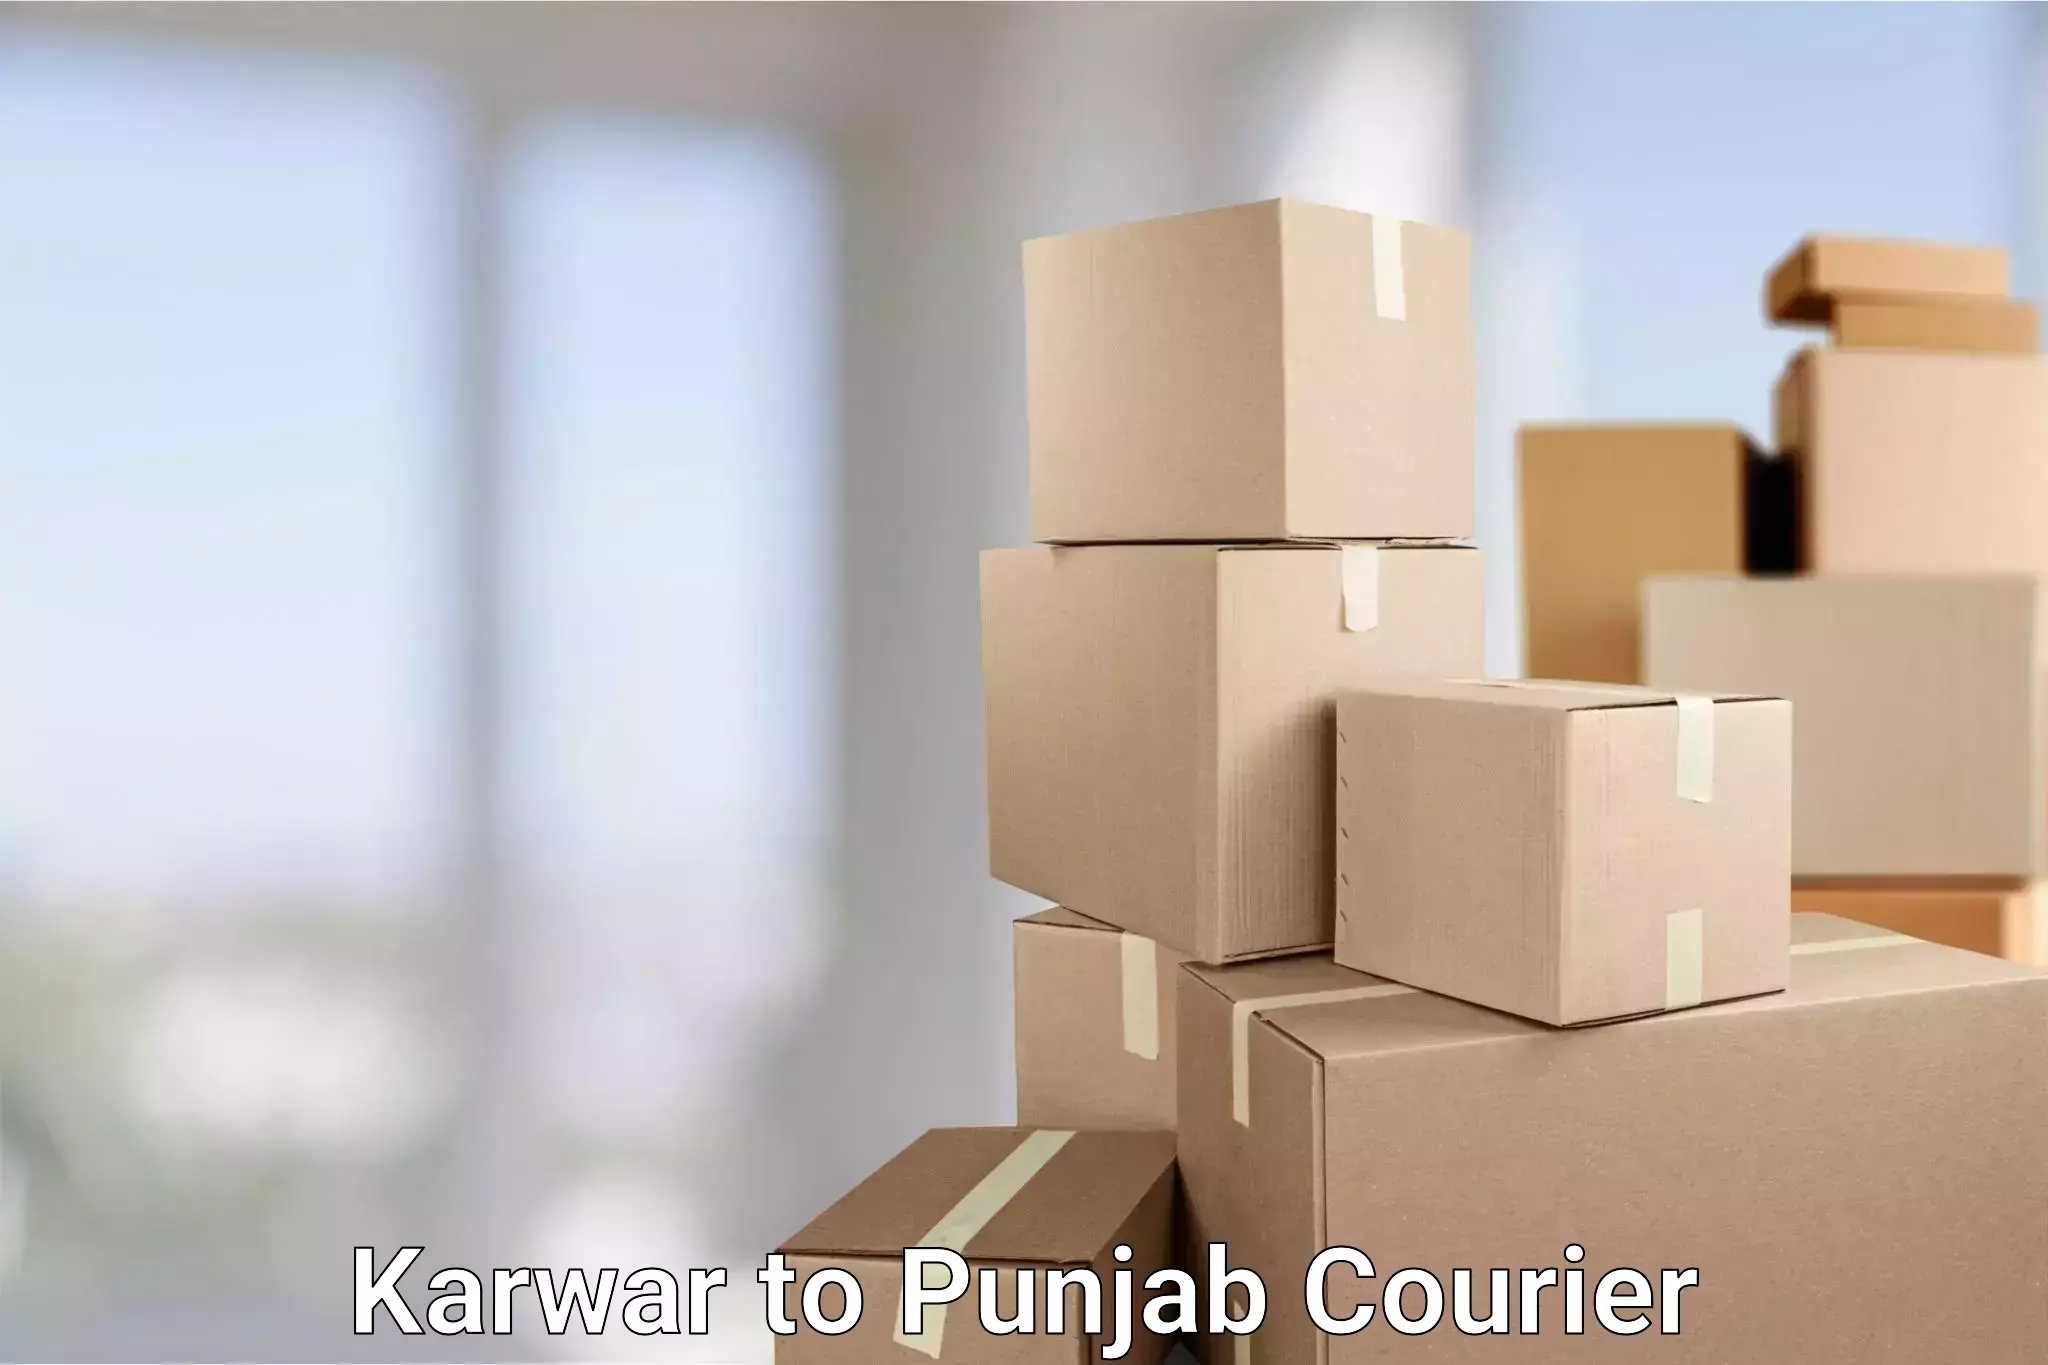 End-to-end delivery Karwar to Punjab